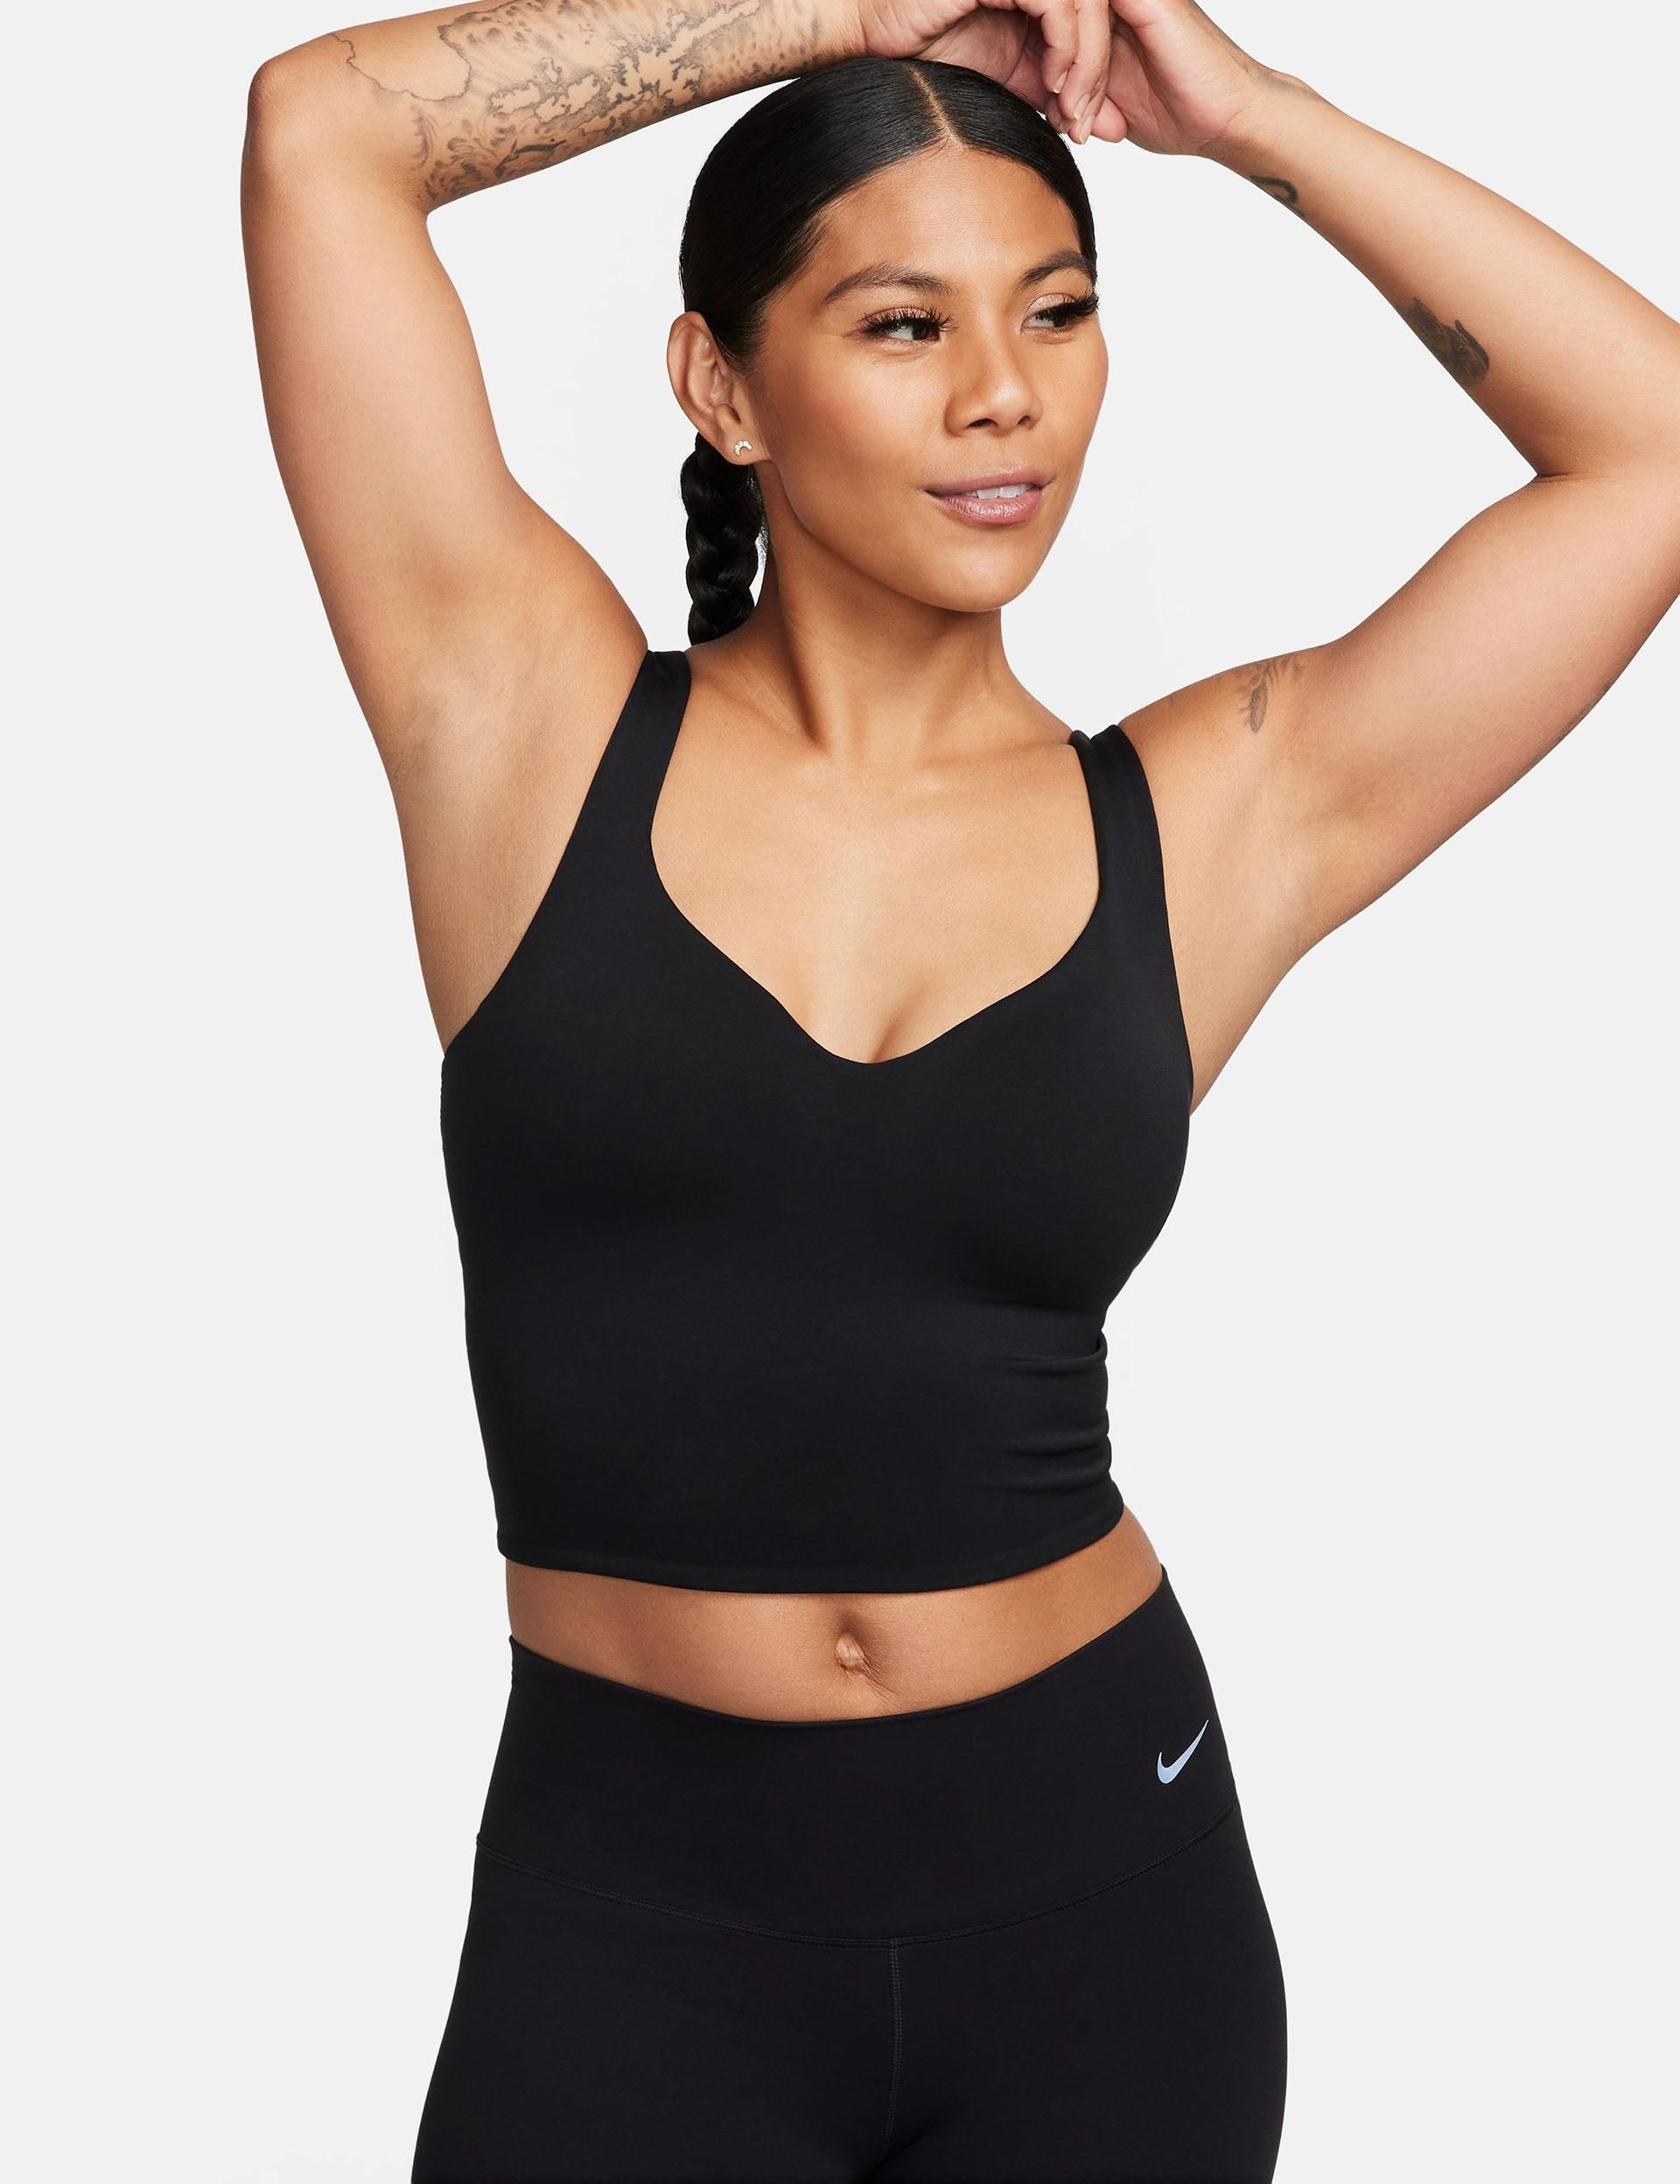 AD  Nike Alate Sports Bra Review + Styling 